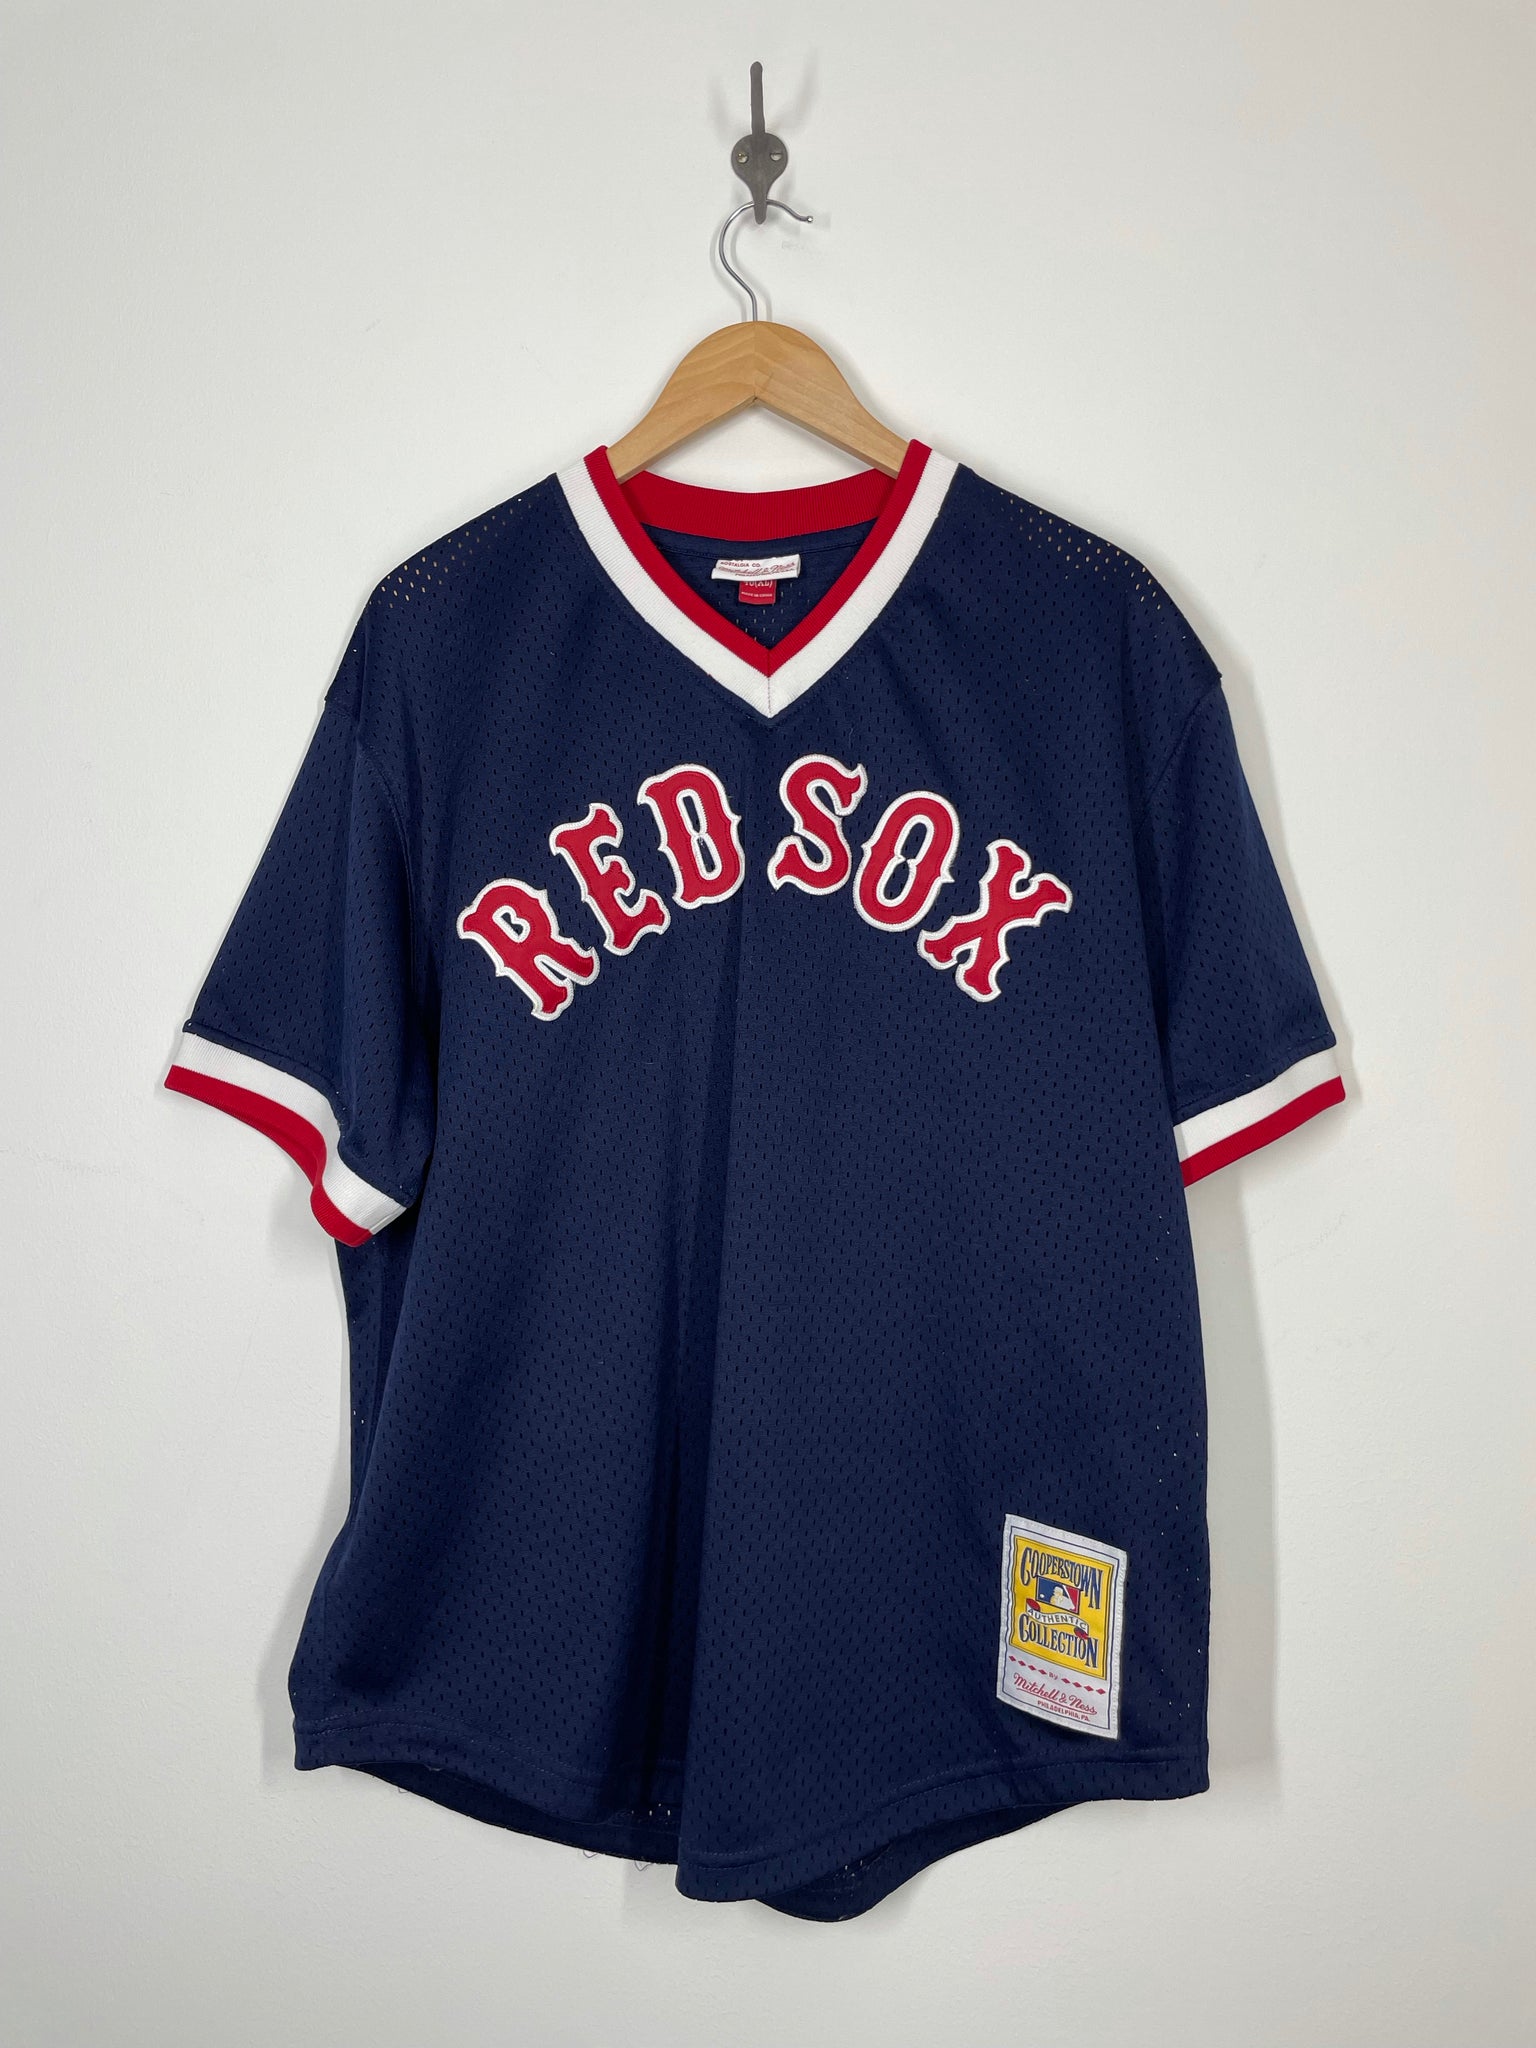 MLB Boston Red Sox Baseball Ted Williams 9 Cooperstown Jersey